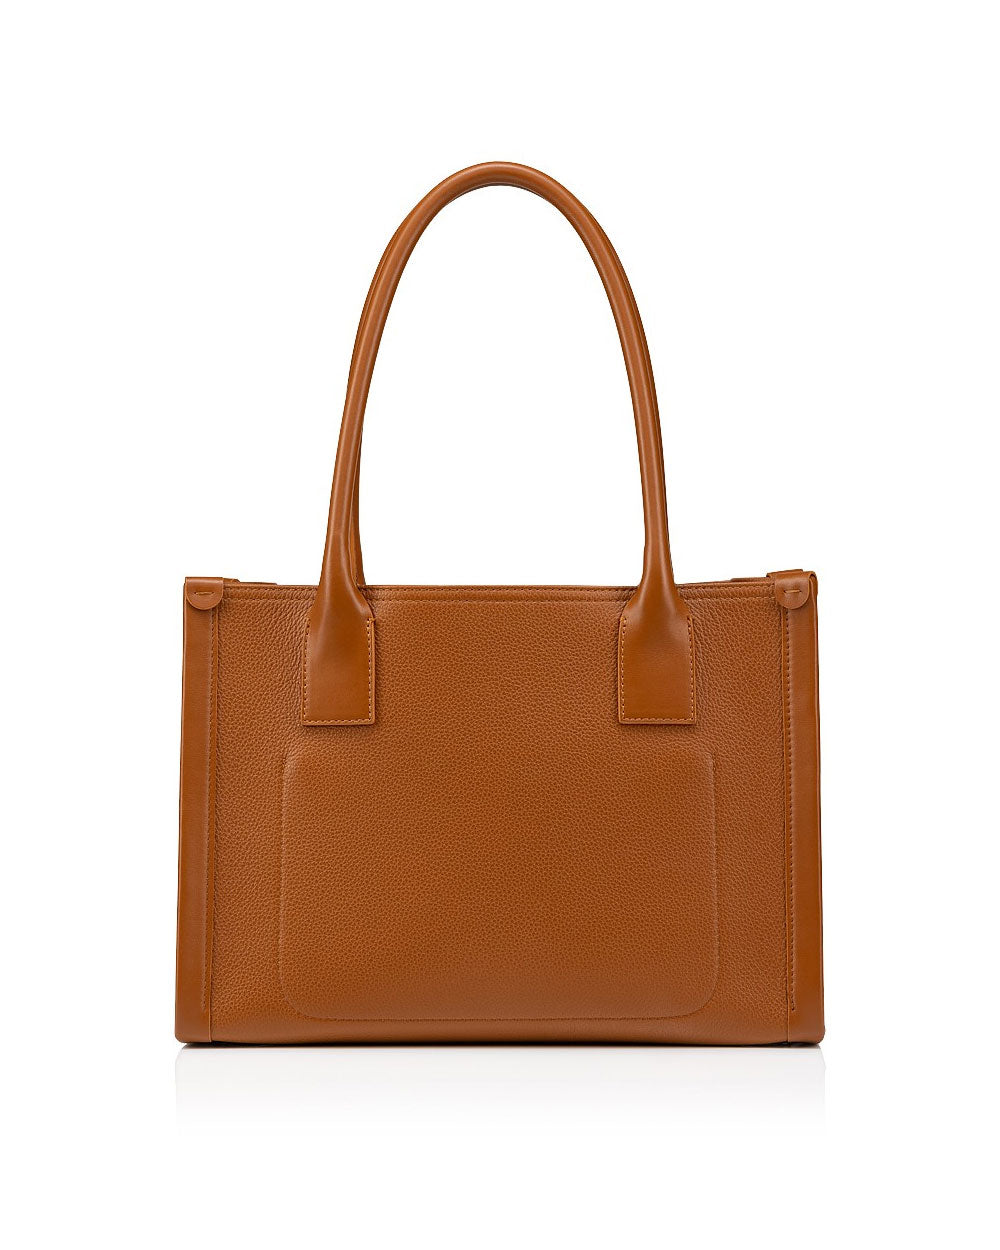 By My Side Small Tote in Cuoio